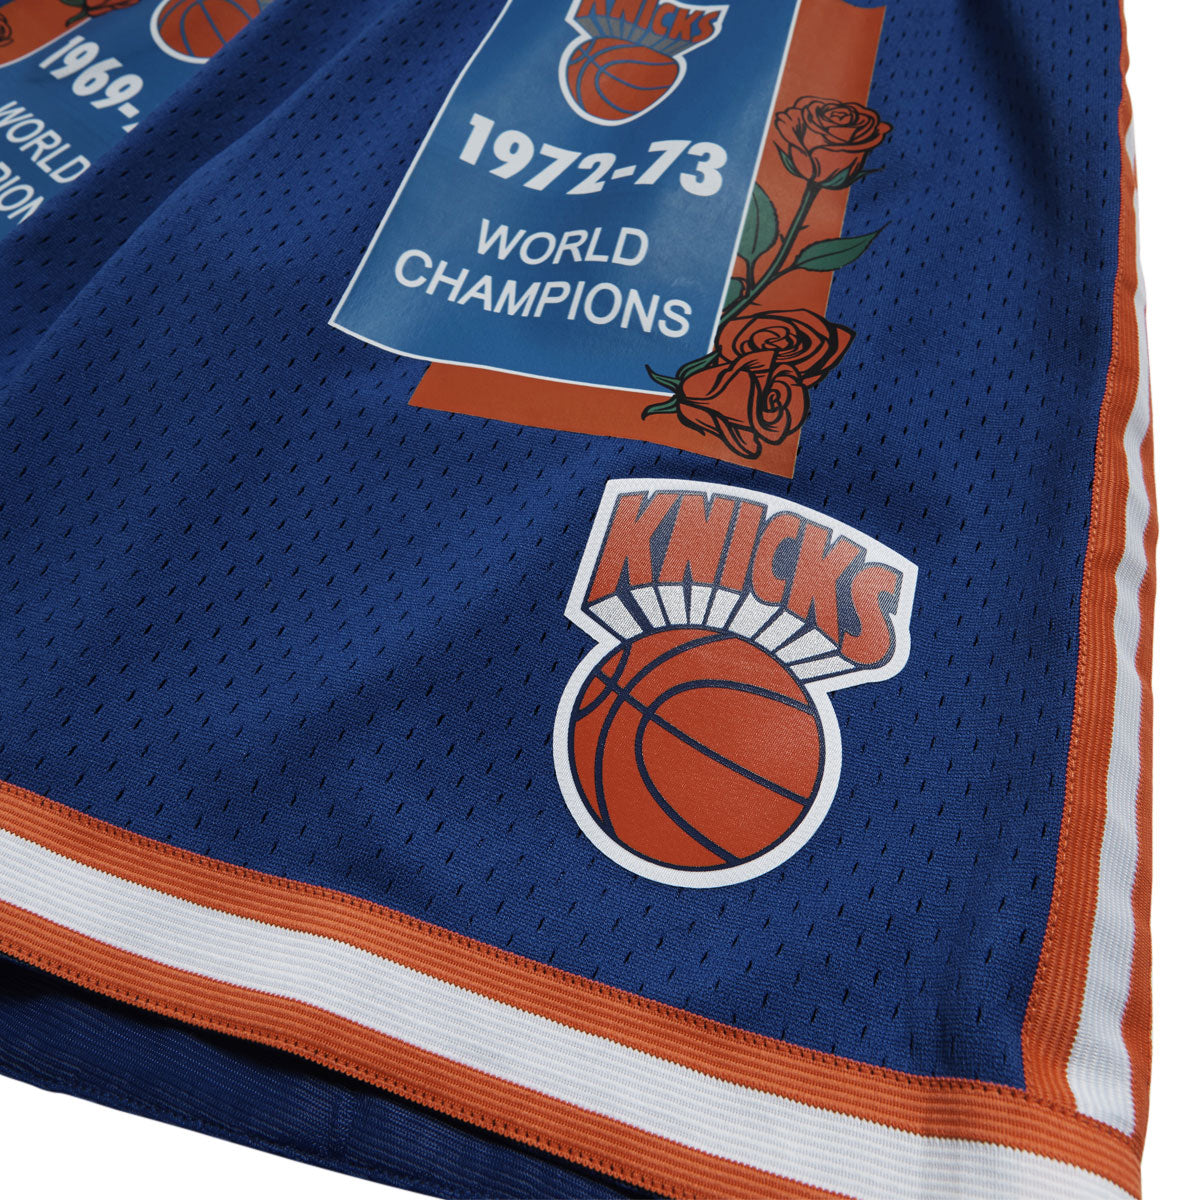 Mitchell & Ness x NBA Roses And Banners Knicks Shorts - Royal image 4